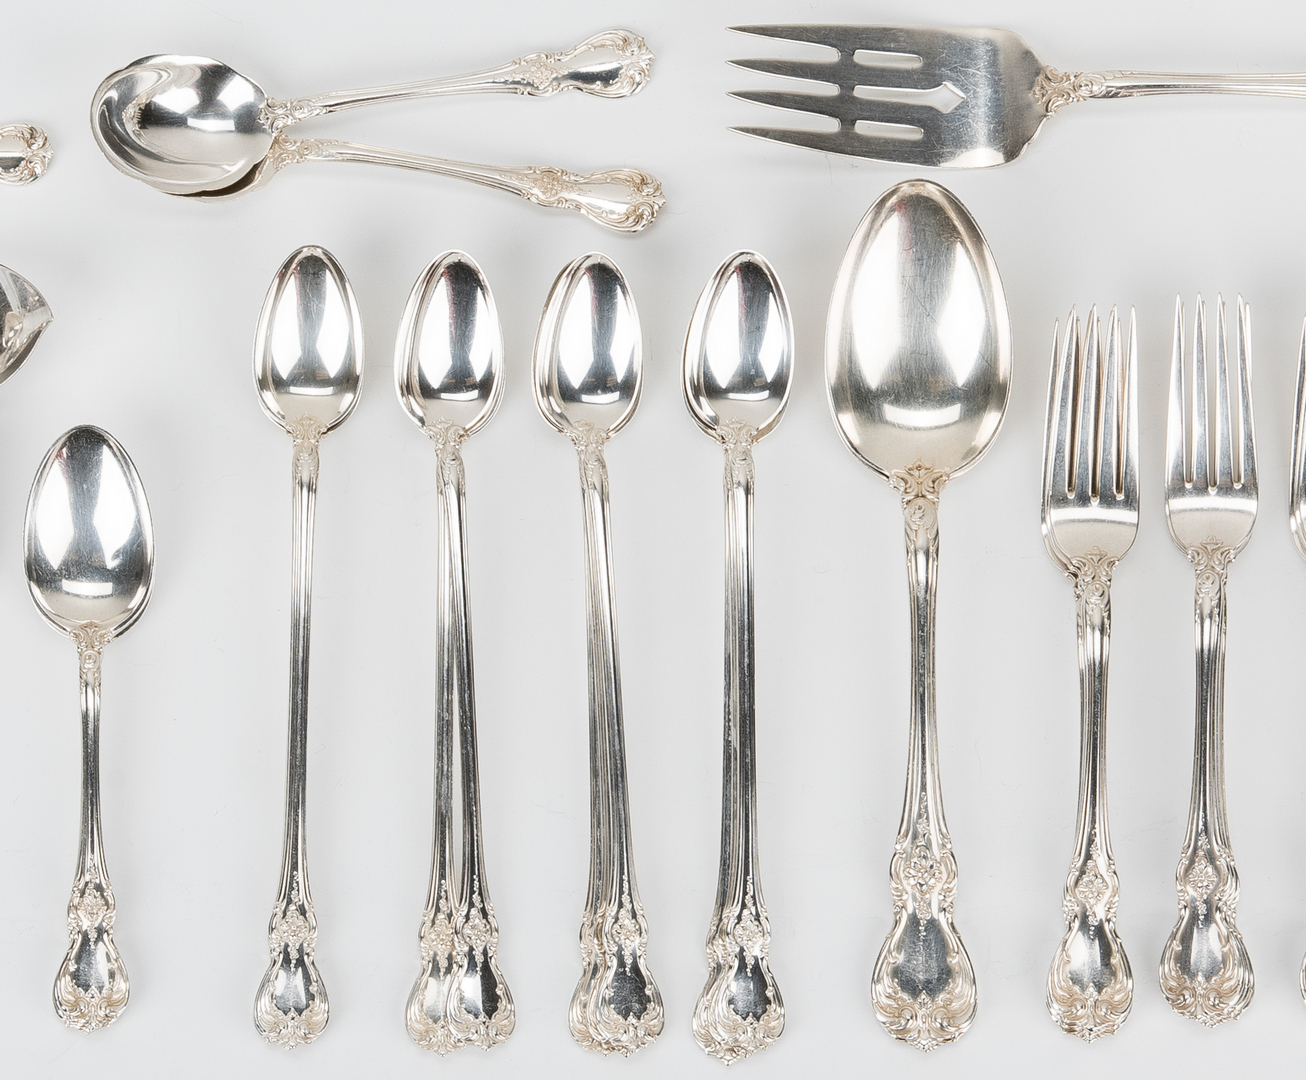 Lot 241: 100 Pcs. Towle Old Master Sterling Silver Flatware